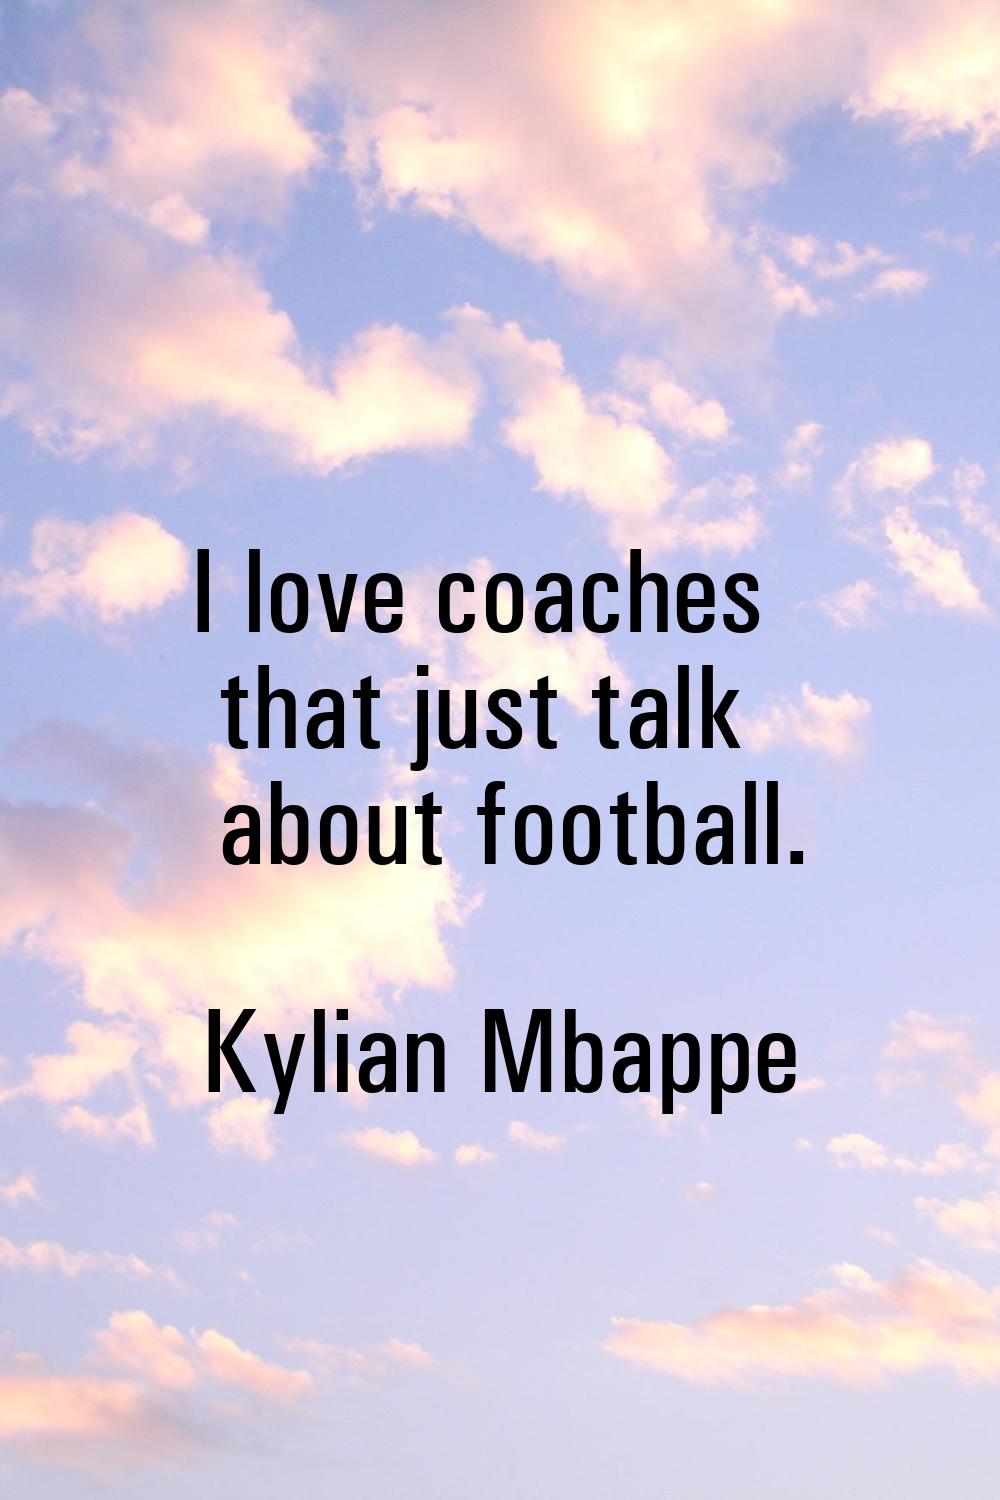 I love coaches that just talk about football.